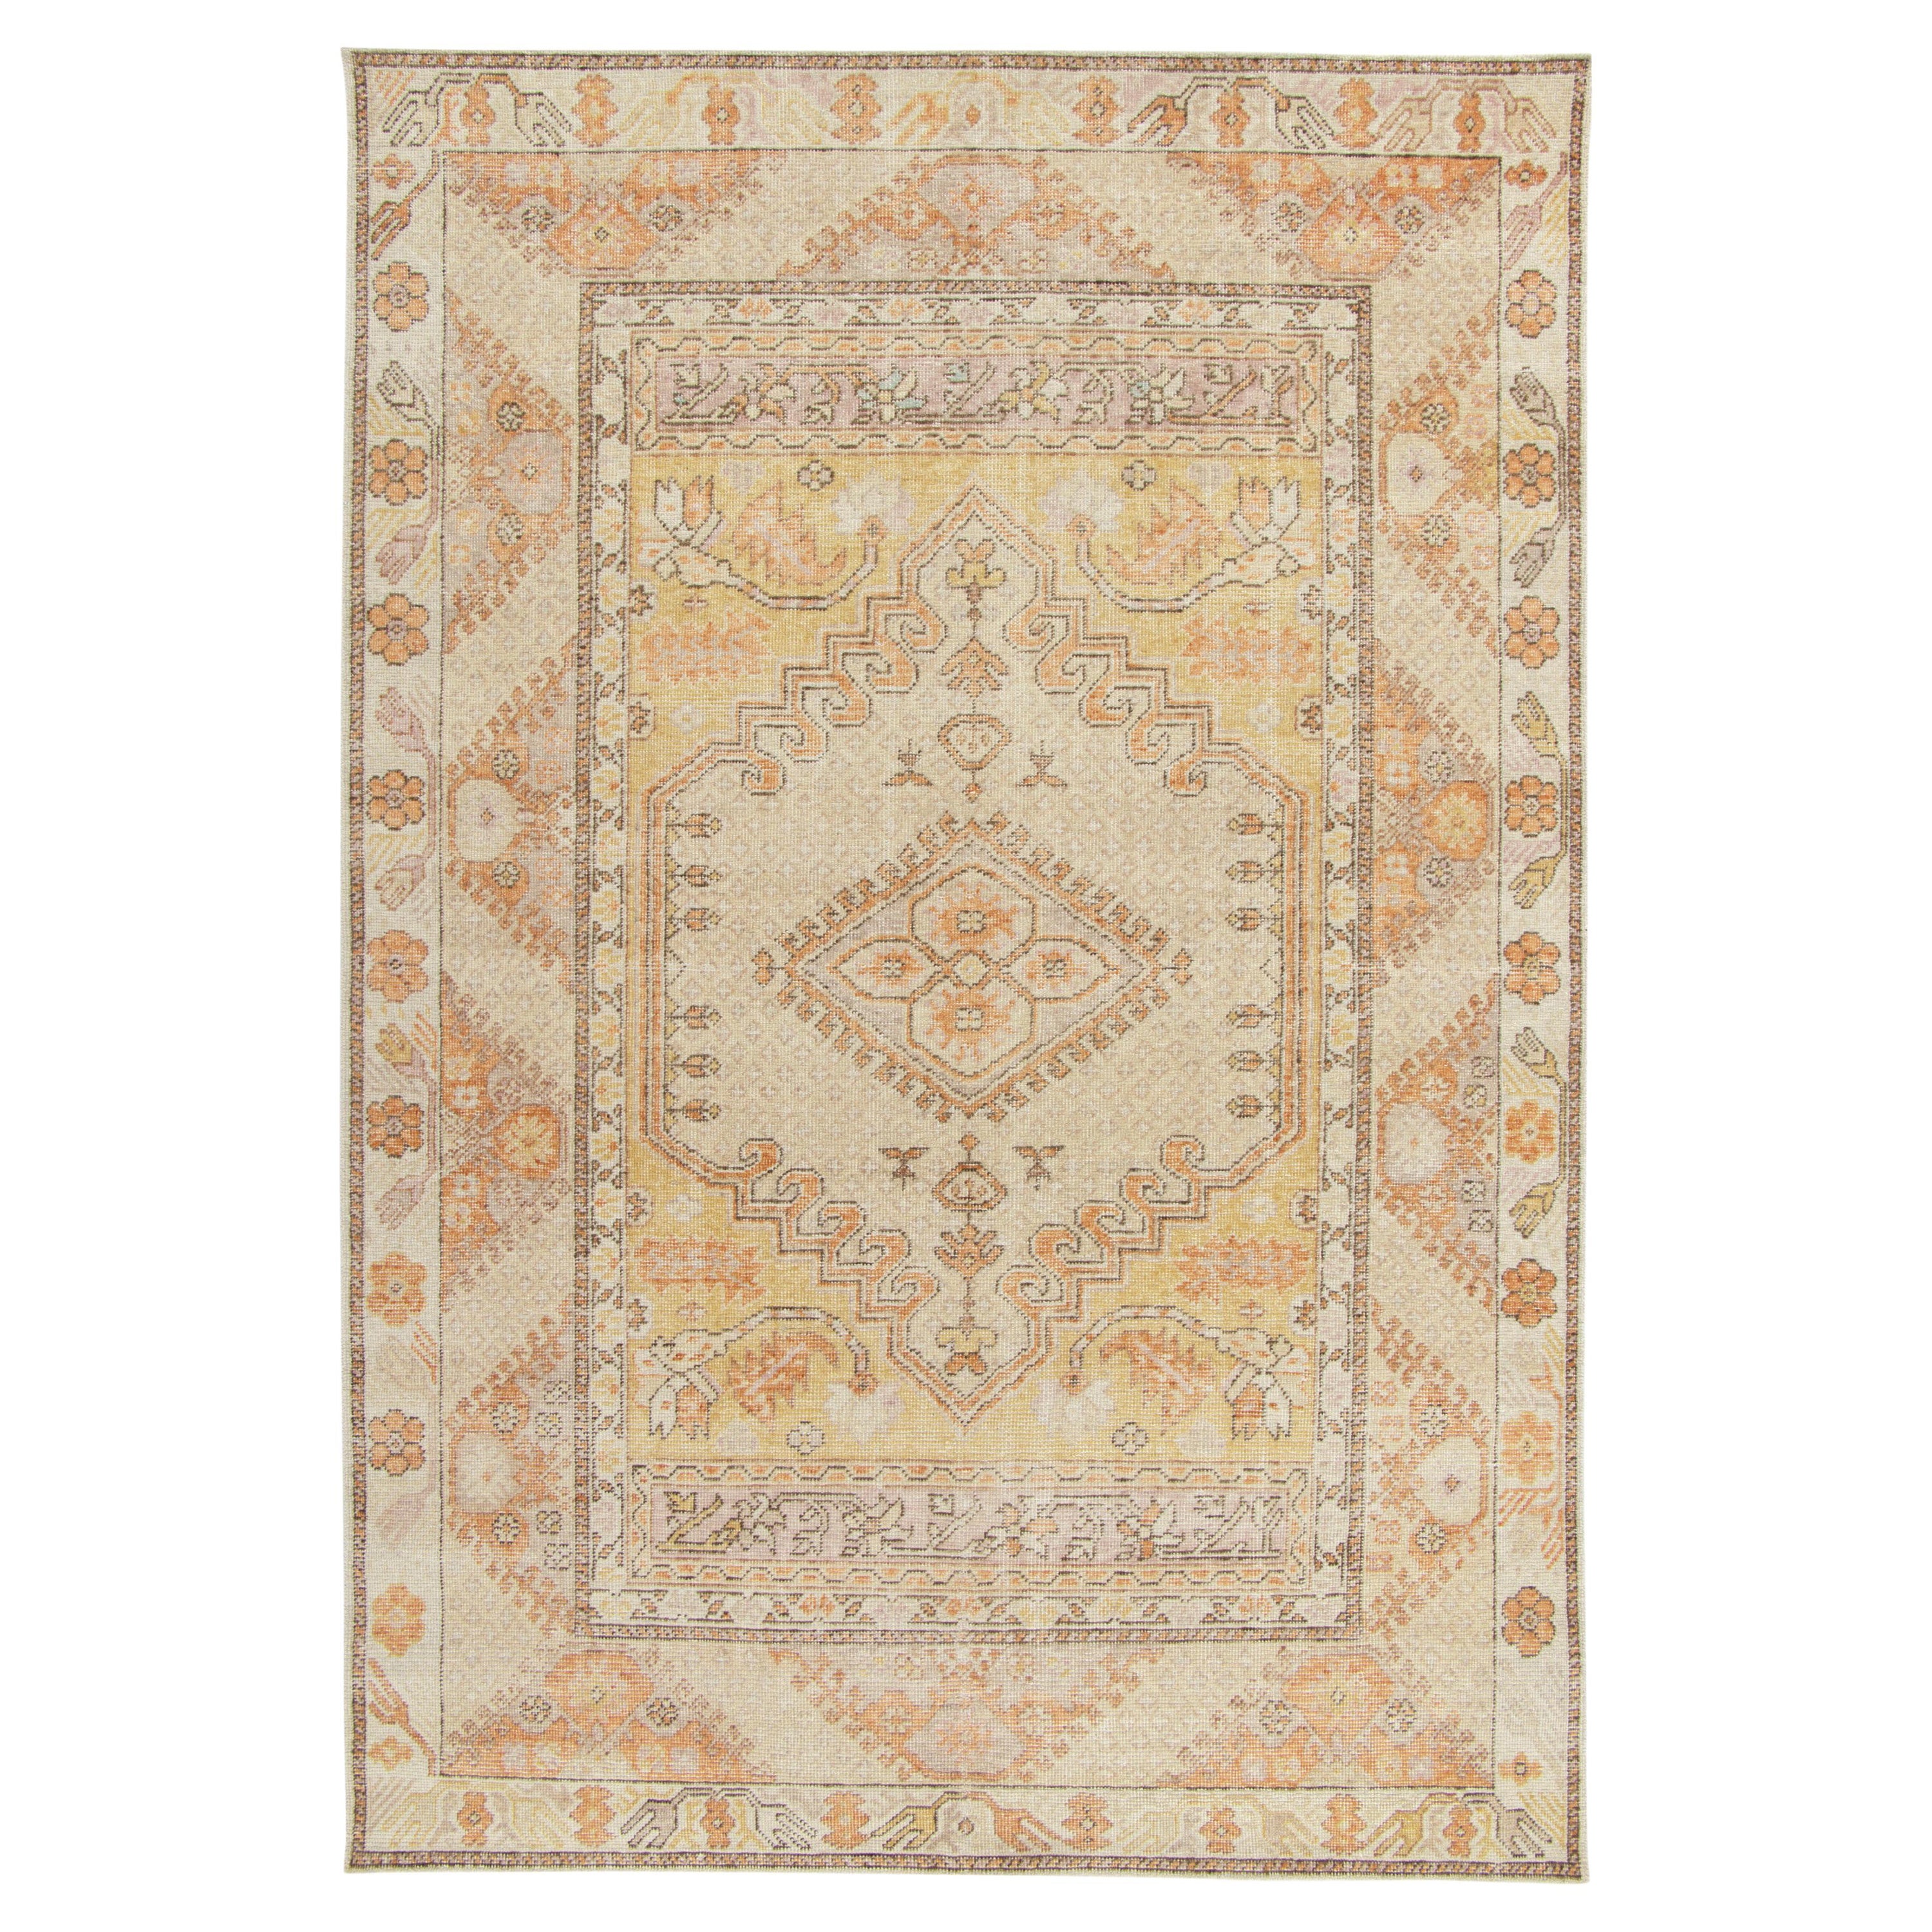 Rug & Kilim's Distressed Classic Style Teppich in Creme, orangefarbenes Medaillon-Muster